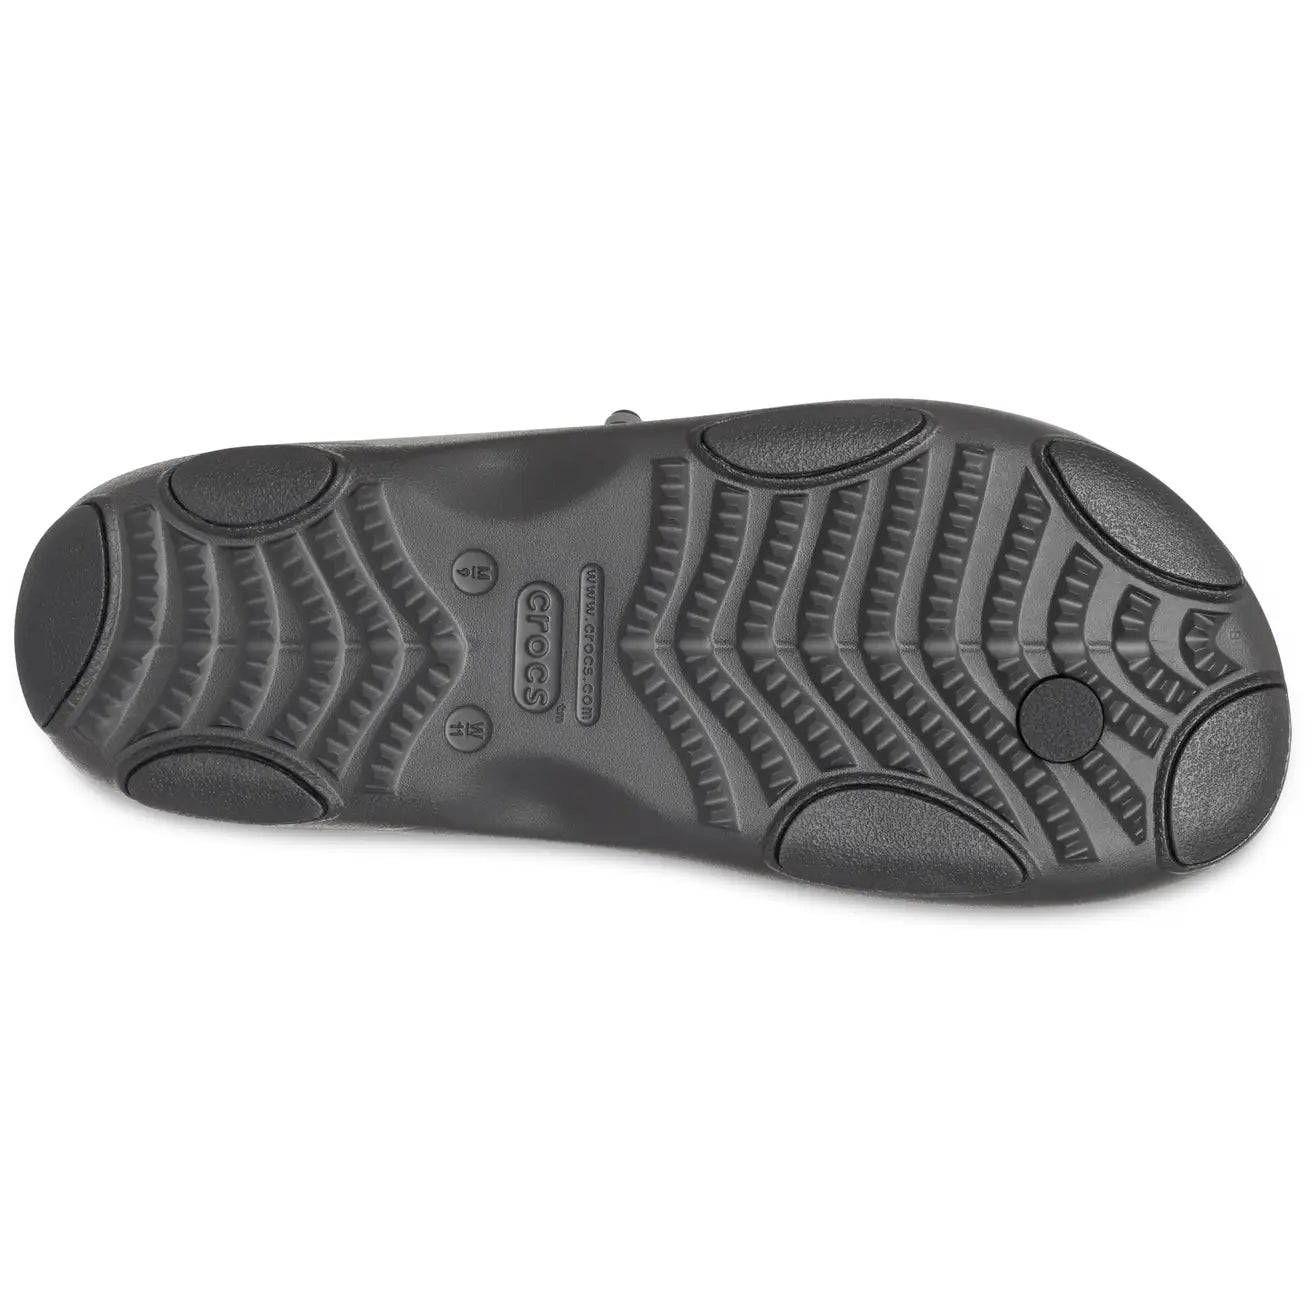 Classic All Terrain Flip | Shop Mens Croc Jandals Online and In-store ...